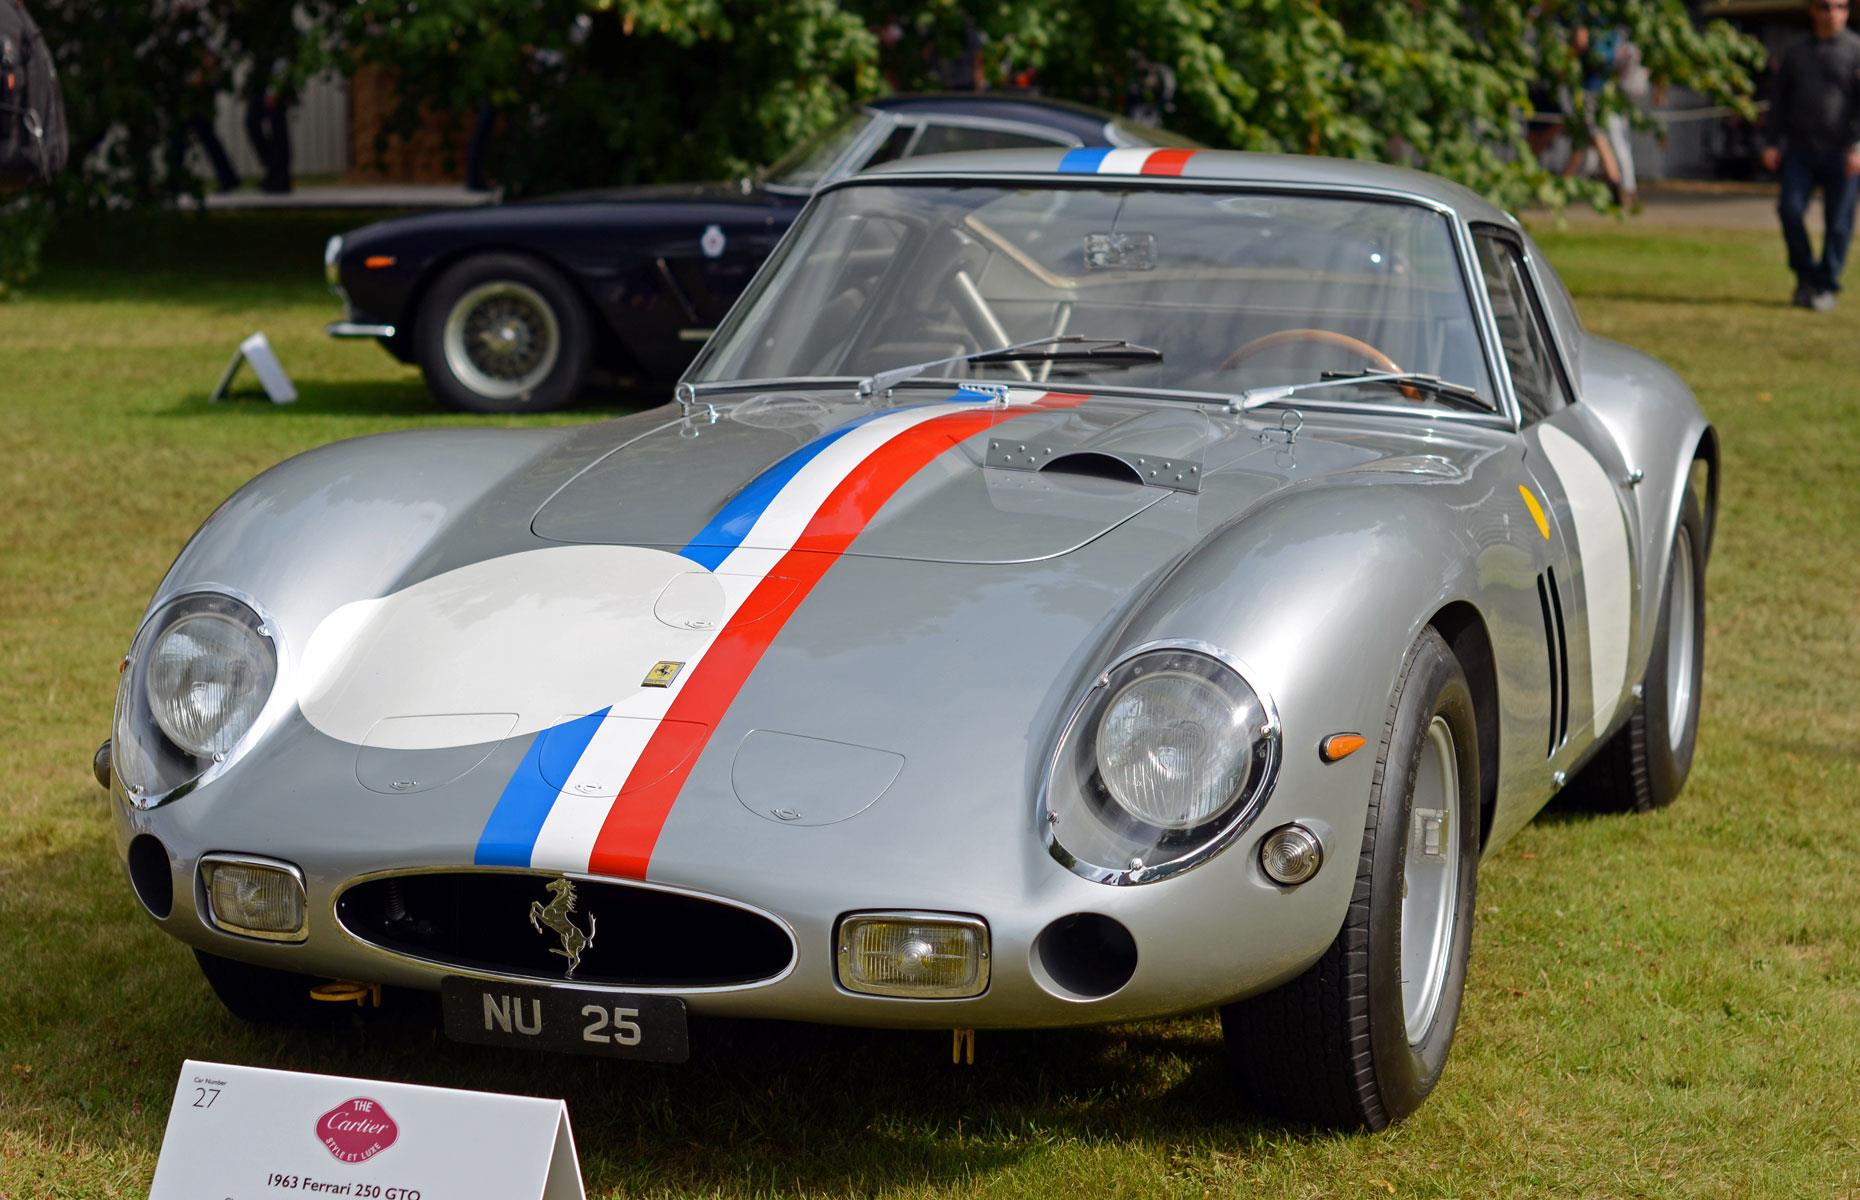 <p>Drum roll please, the most expensive car ever sold is this 1963 Ferrari 250 GTO. The holy grail of sportcars, the legendary silver Ferrari, which features French tricolore stripes, was bought in 2018 by David MacNeil, the billionaire founder of the WeatherTech car floor mats company, for an eye-watering $80 million (£58.2m).</p>